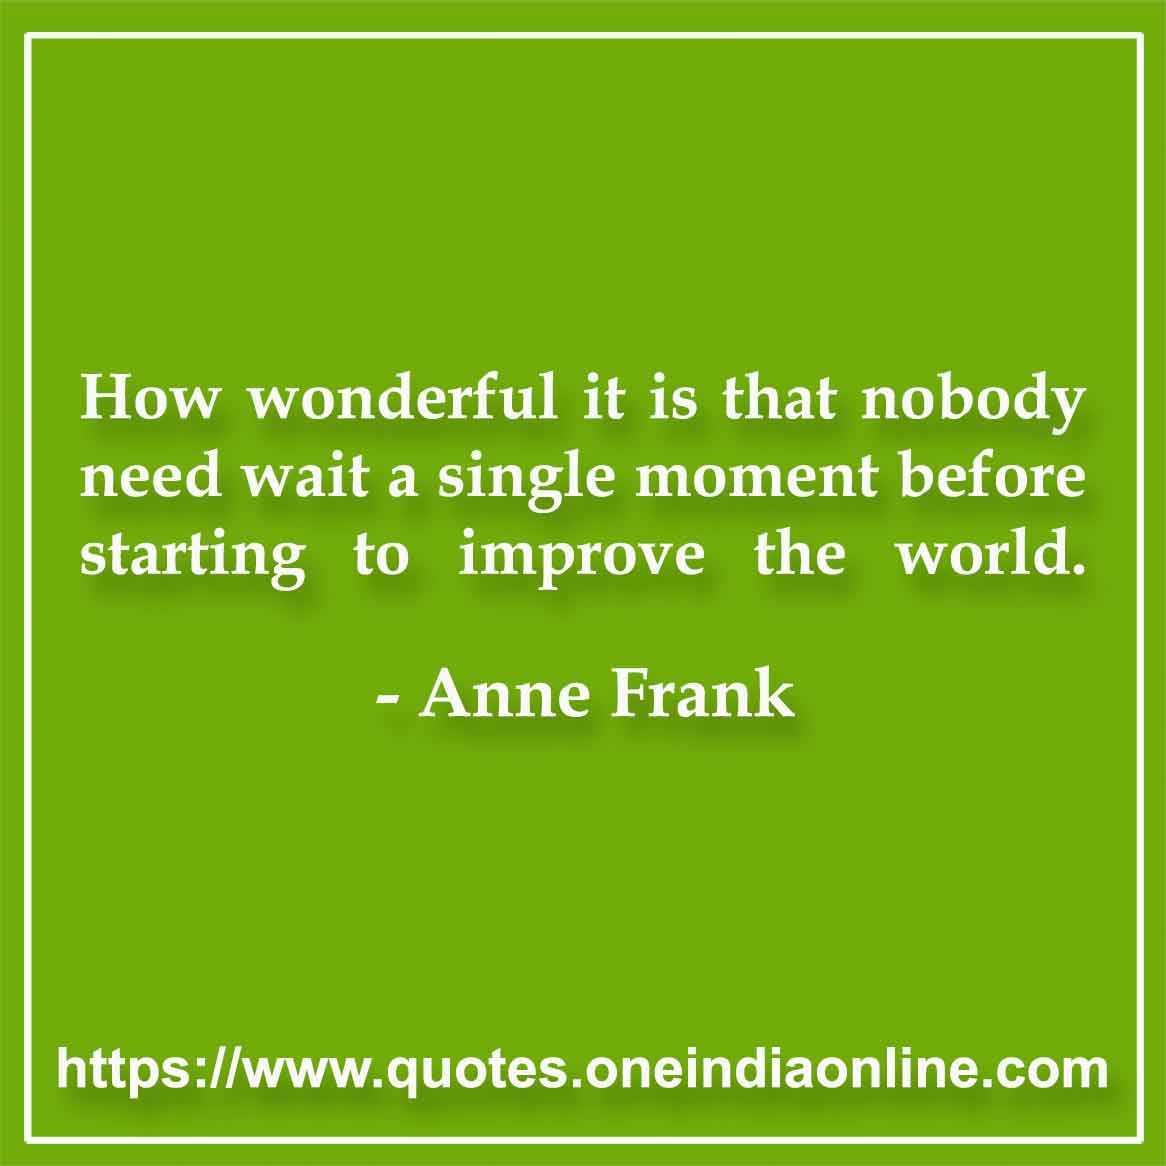 How wonderful it is that nobody need wait a single moment before starting to improve the world.

-  Anne Frank